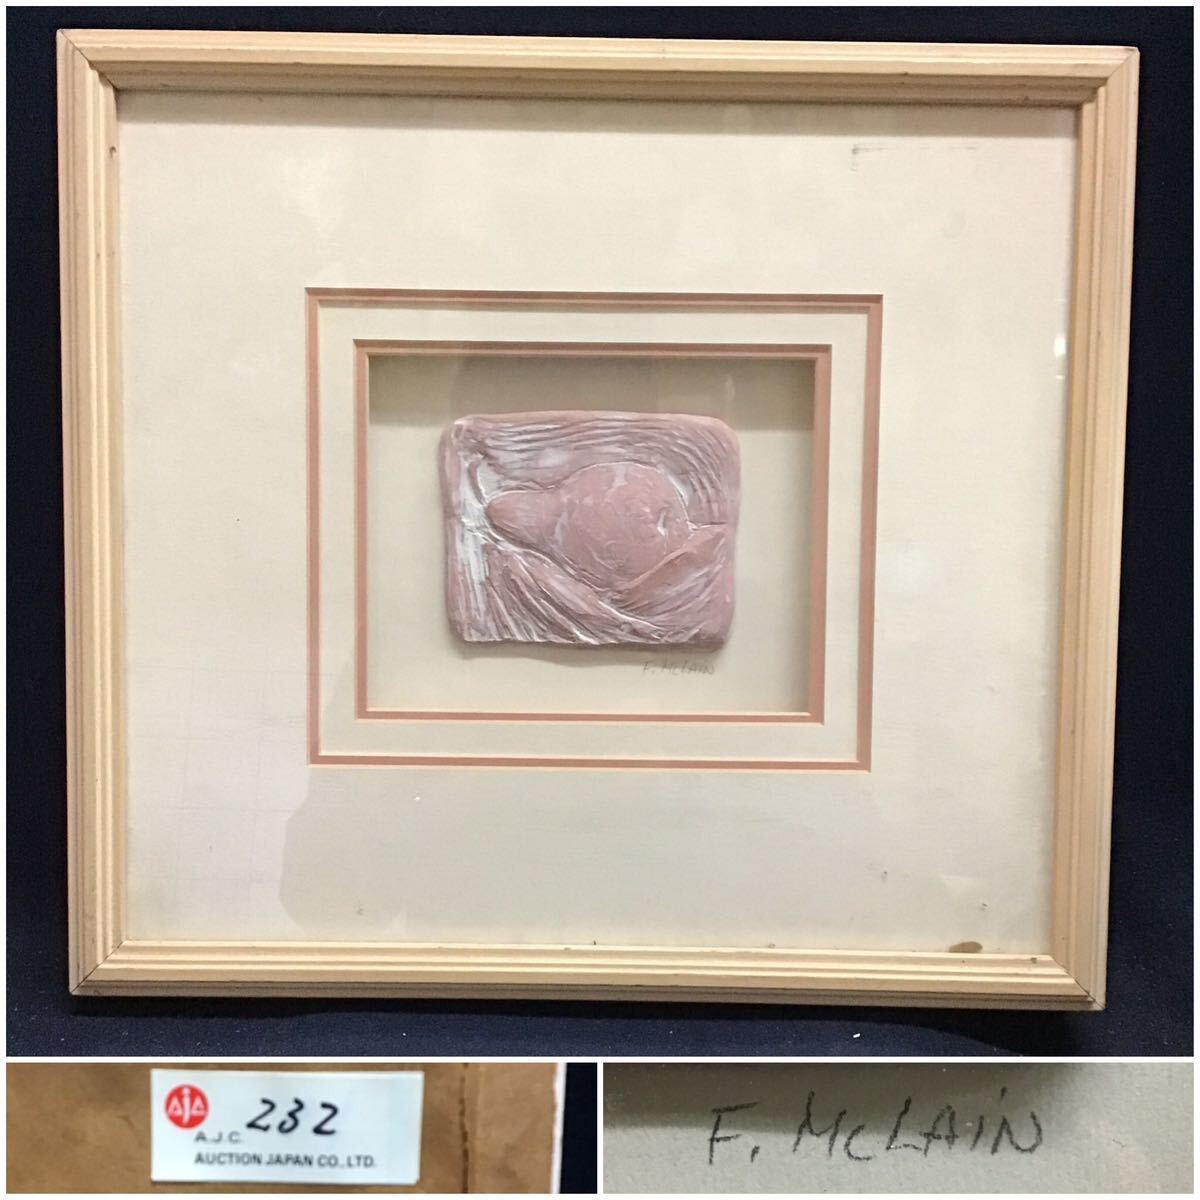 [Authentic work] F. McLain framed ceramic framed sculptural stairwell Terracotta picture frame AJC auction item LaFrance pear McLain, artwork, painting, others